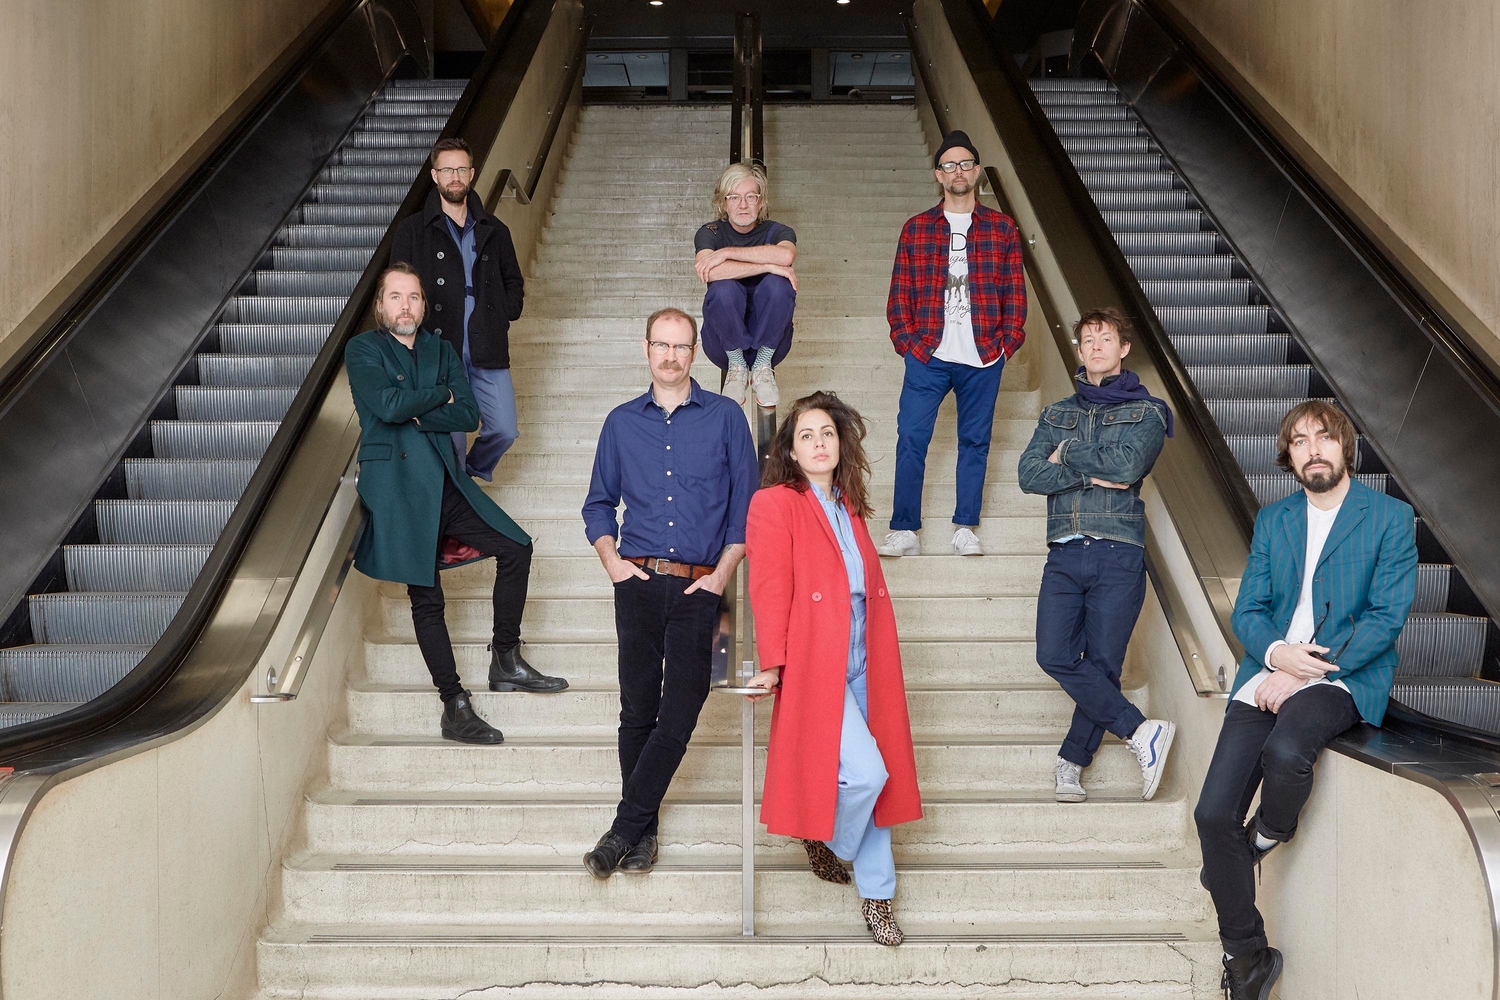 Broken Social Scene to release ‘Let’s Try The After - Vol 1’ EP